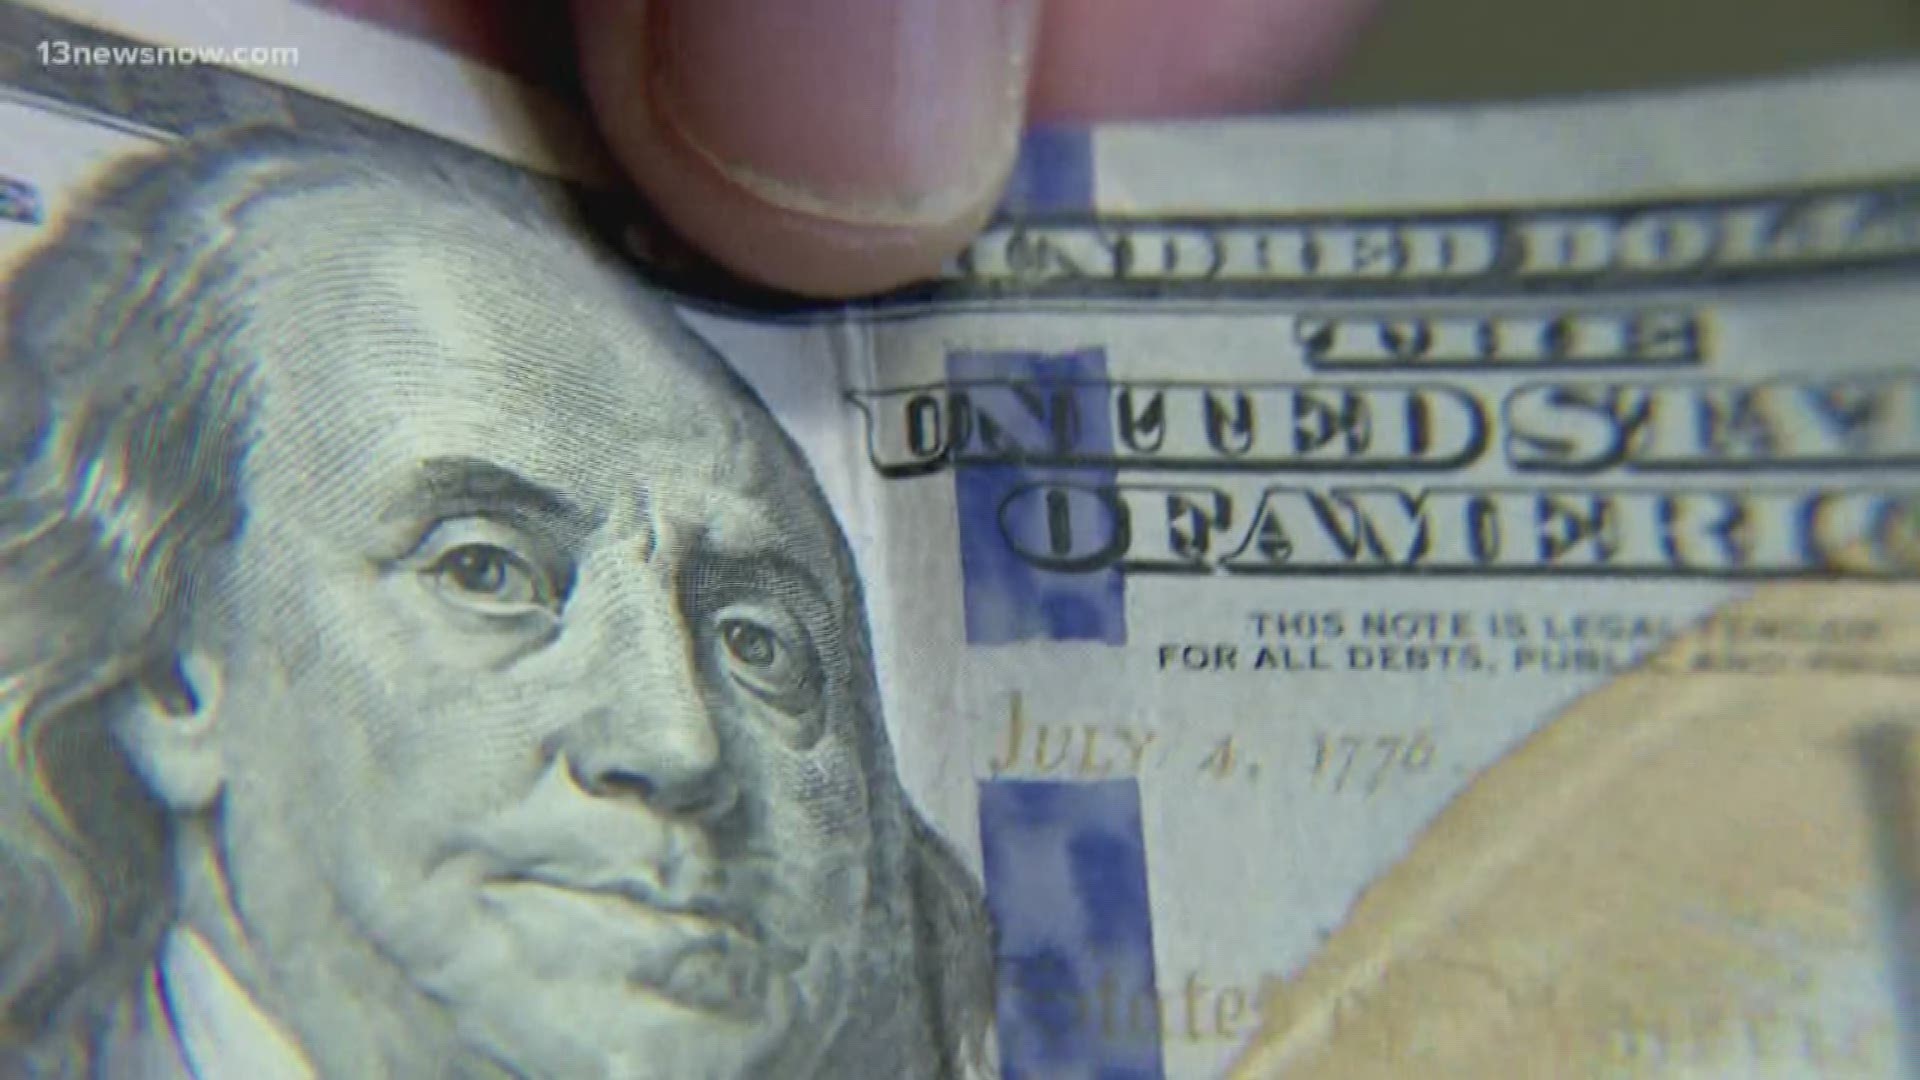 Police are urging shoppers to take a few extra minutes to make sure they're not getting counterfeit bills. Police provided some tips on what to look for.